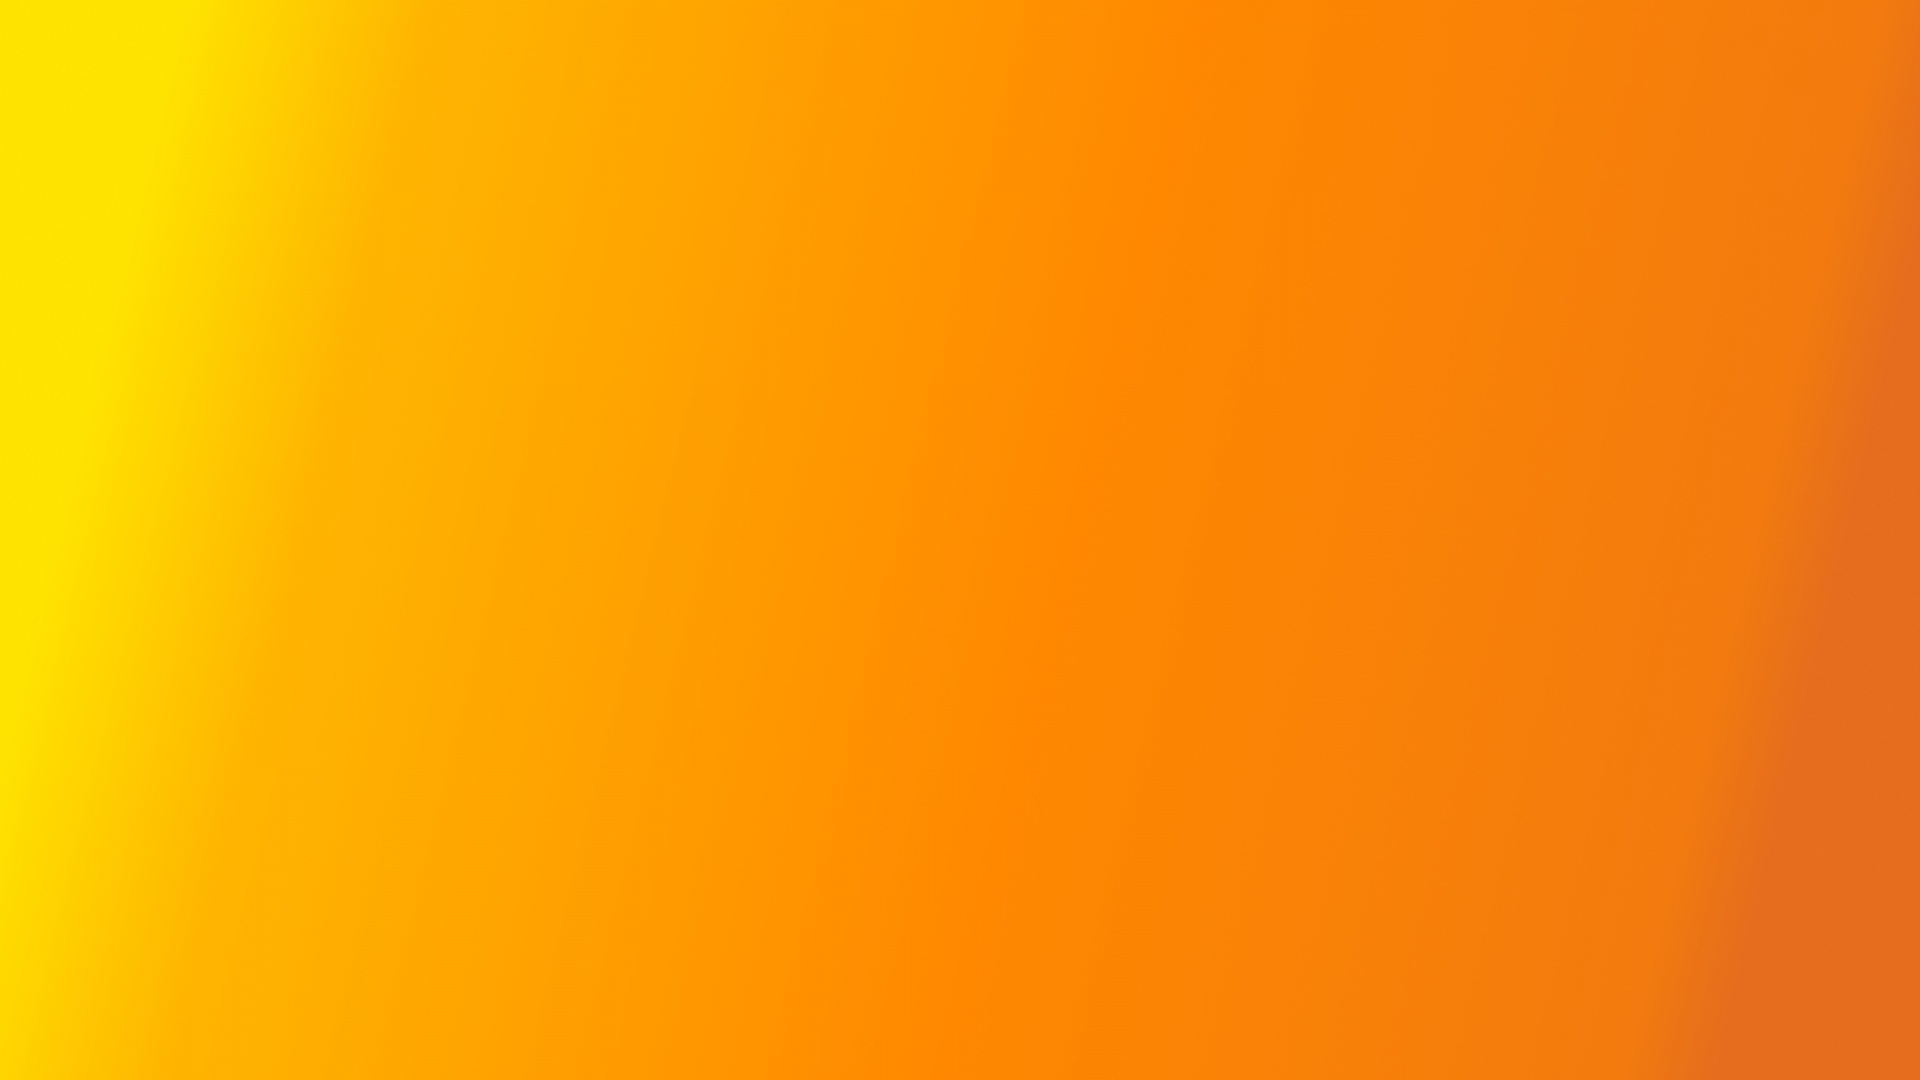 Yellow,orange,background,backgrounds,pattern - free image from 